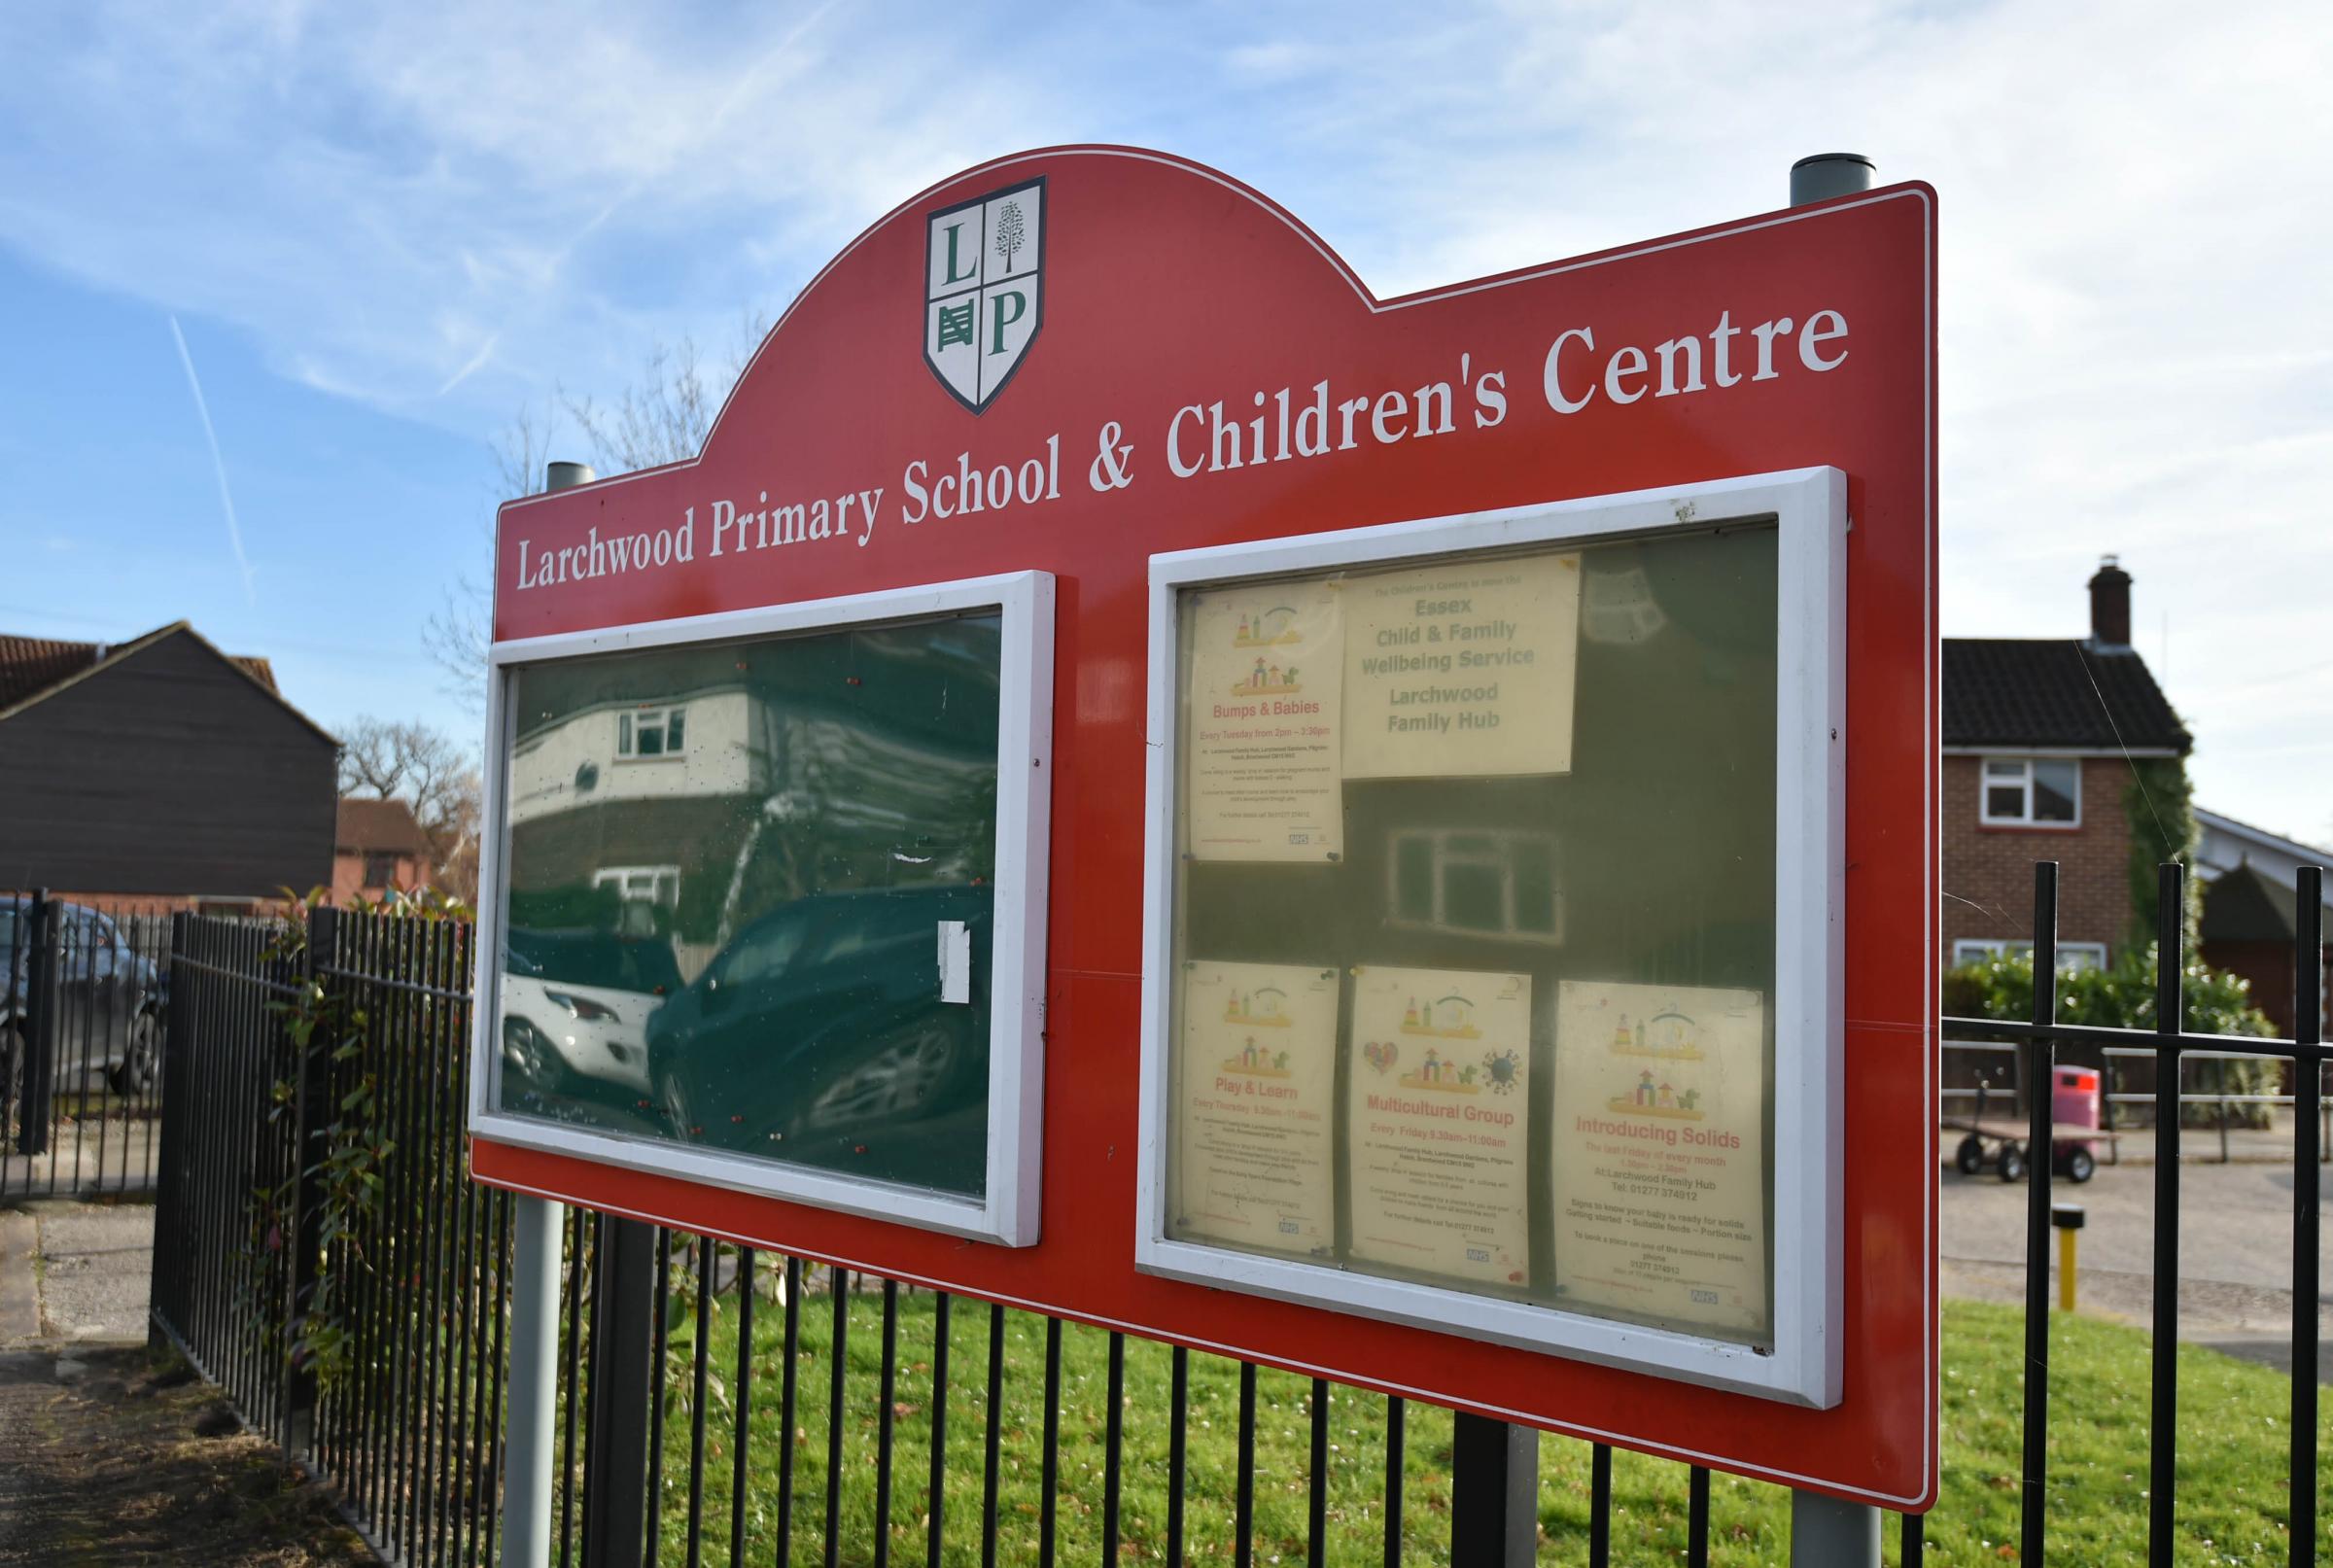 Larchwood Primary School in Pilgrims Hatch, Brentwood, Essex, where pupils are being tested for the new Omicron variant of Covid-19 after a person was confirmed to have contracted the variant. Picture date: Monday November 29, 2021.